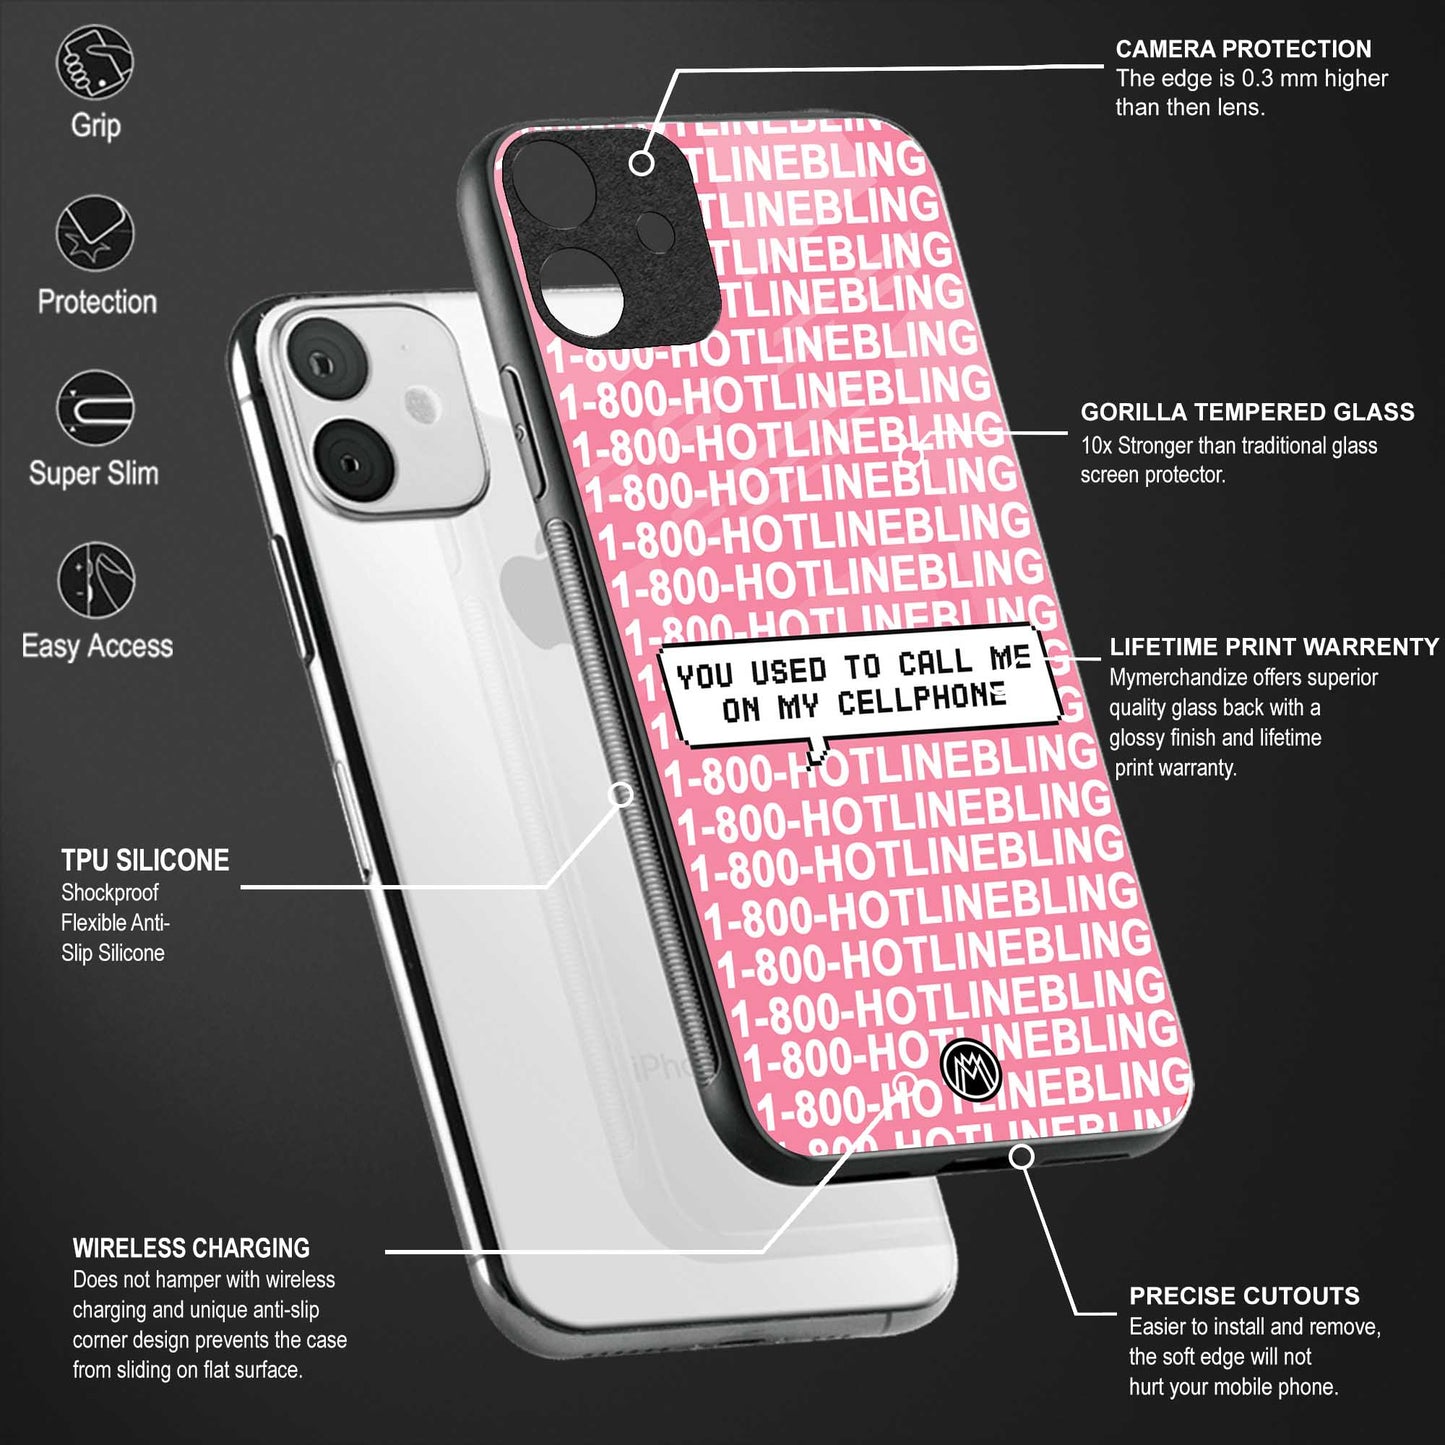 1800 hotline bling phone cover for realme 5 pro 